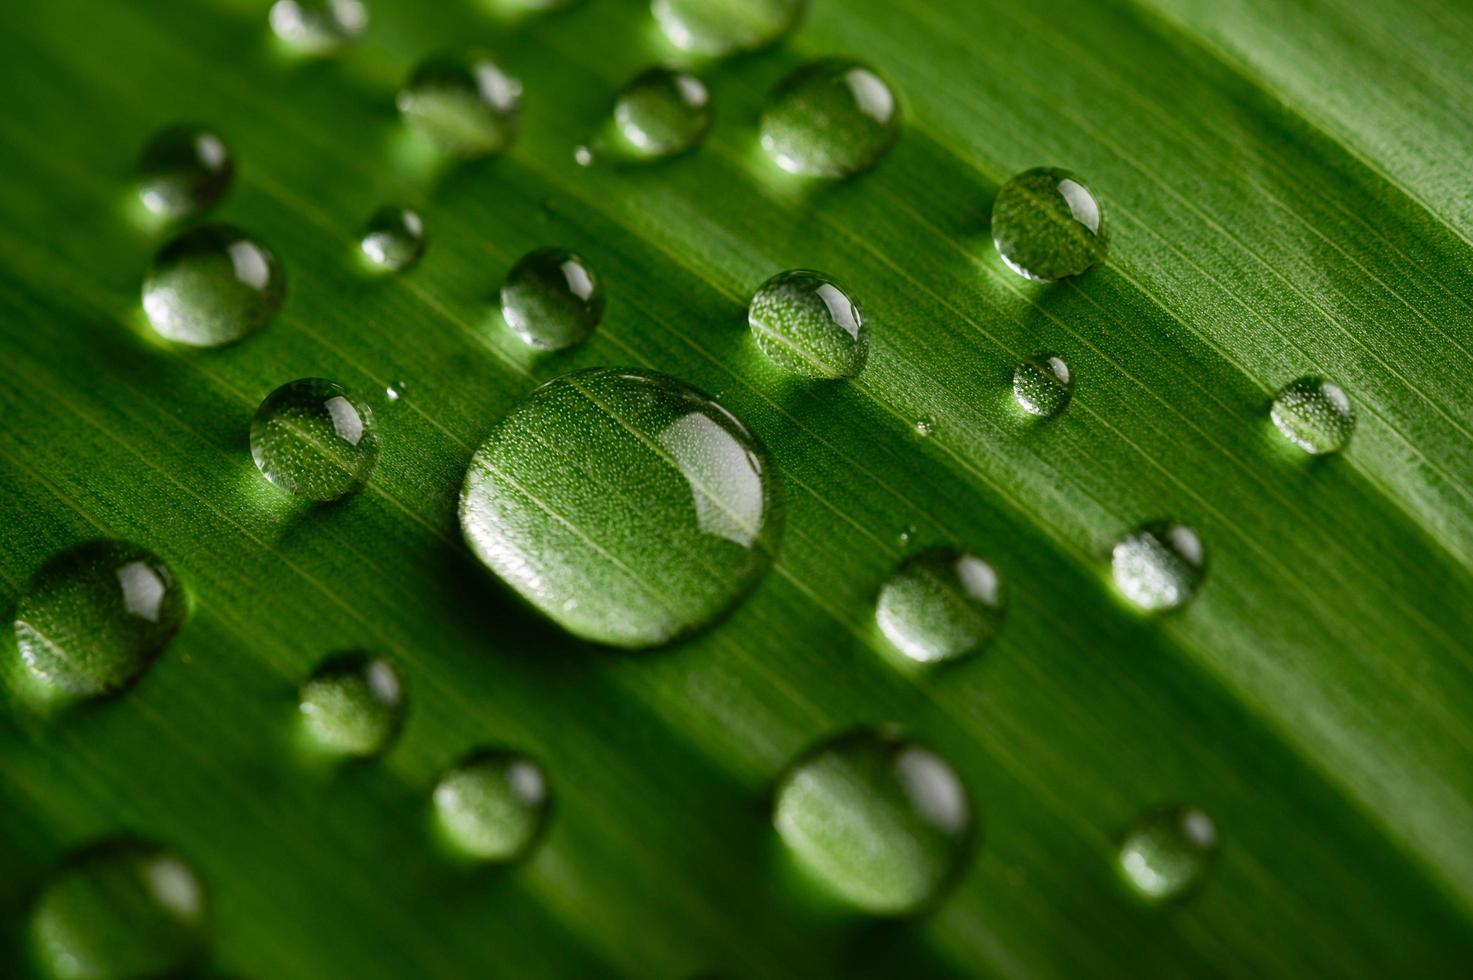 Many droplets of water on banana leaves photo